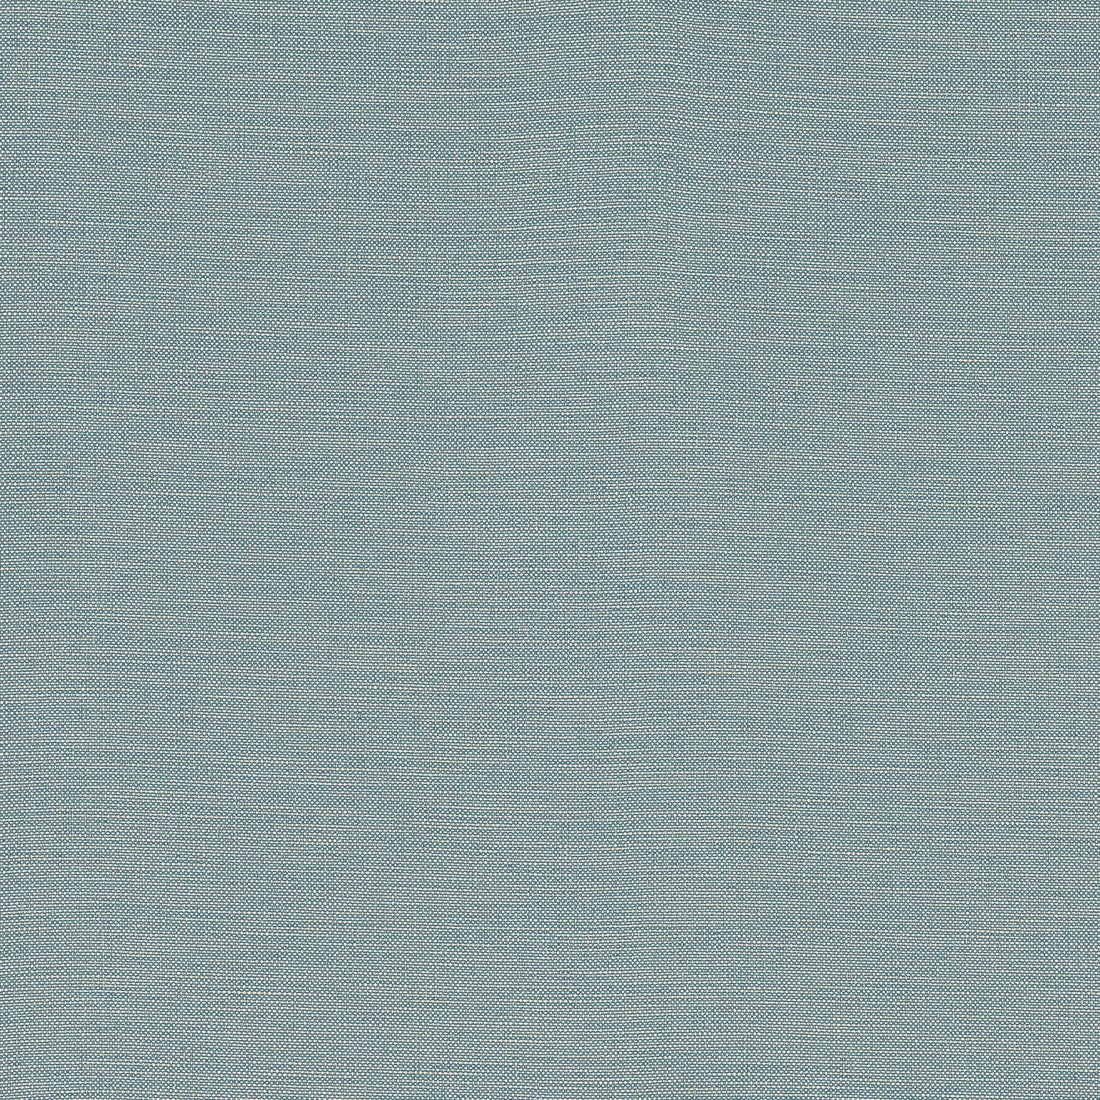 Finley fabric in teal color - pattern number W81618 - by Thibaut in the Locale collection